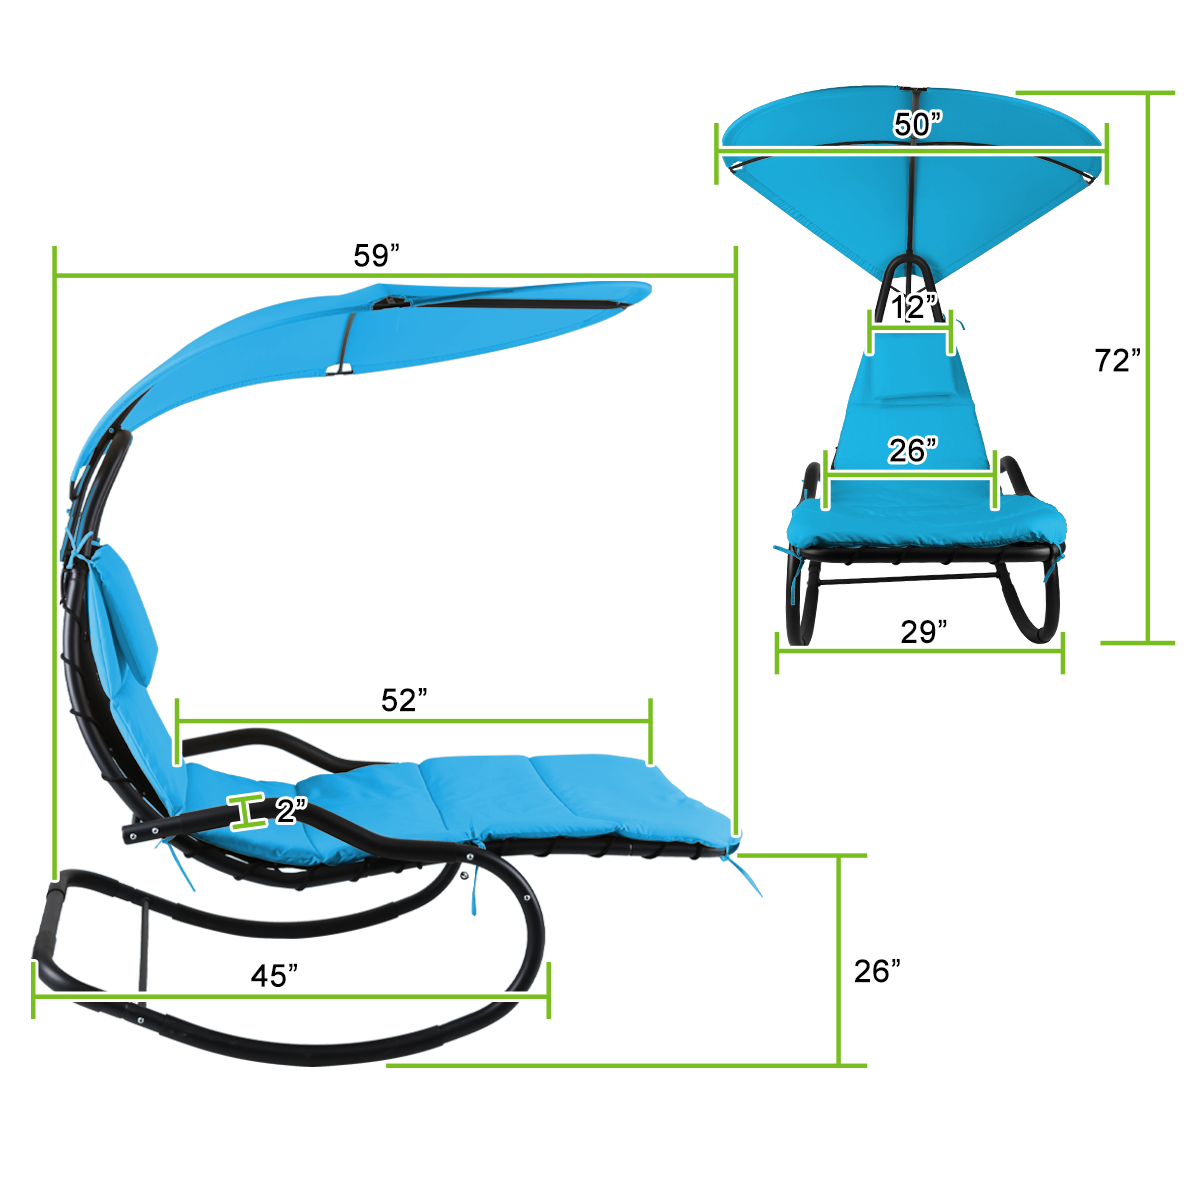 Rocking Hanging Lounge Chair - Curved Chaise Rocking Lounge Chair Swing For Backyard Patio w/ Built-in Pillow Removable Canopy with stand {Blue} - image 4 of 8